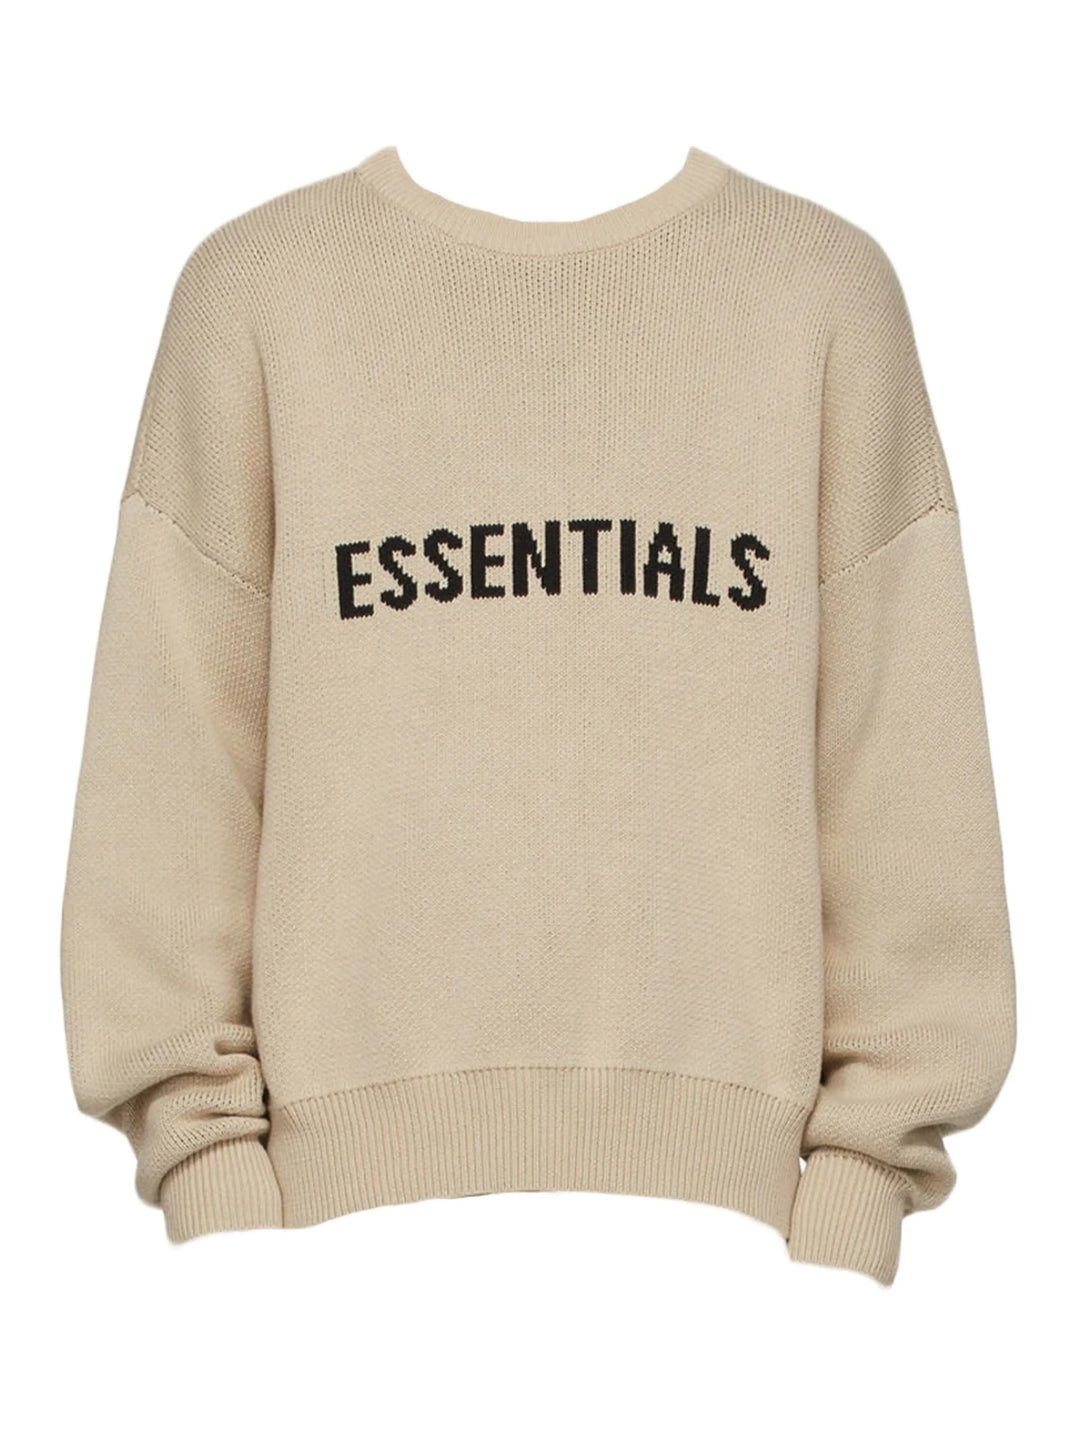 Fear of God Essentials X SSENSE Exclusive Pullover Sweater Linen [FW21] Prior